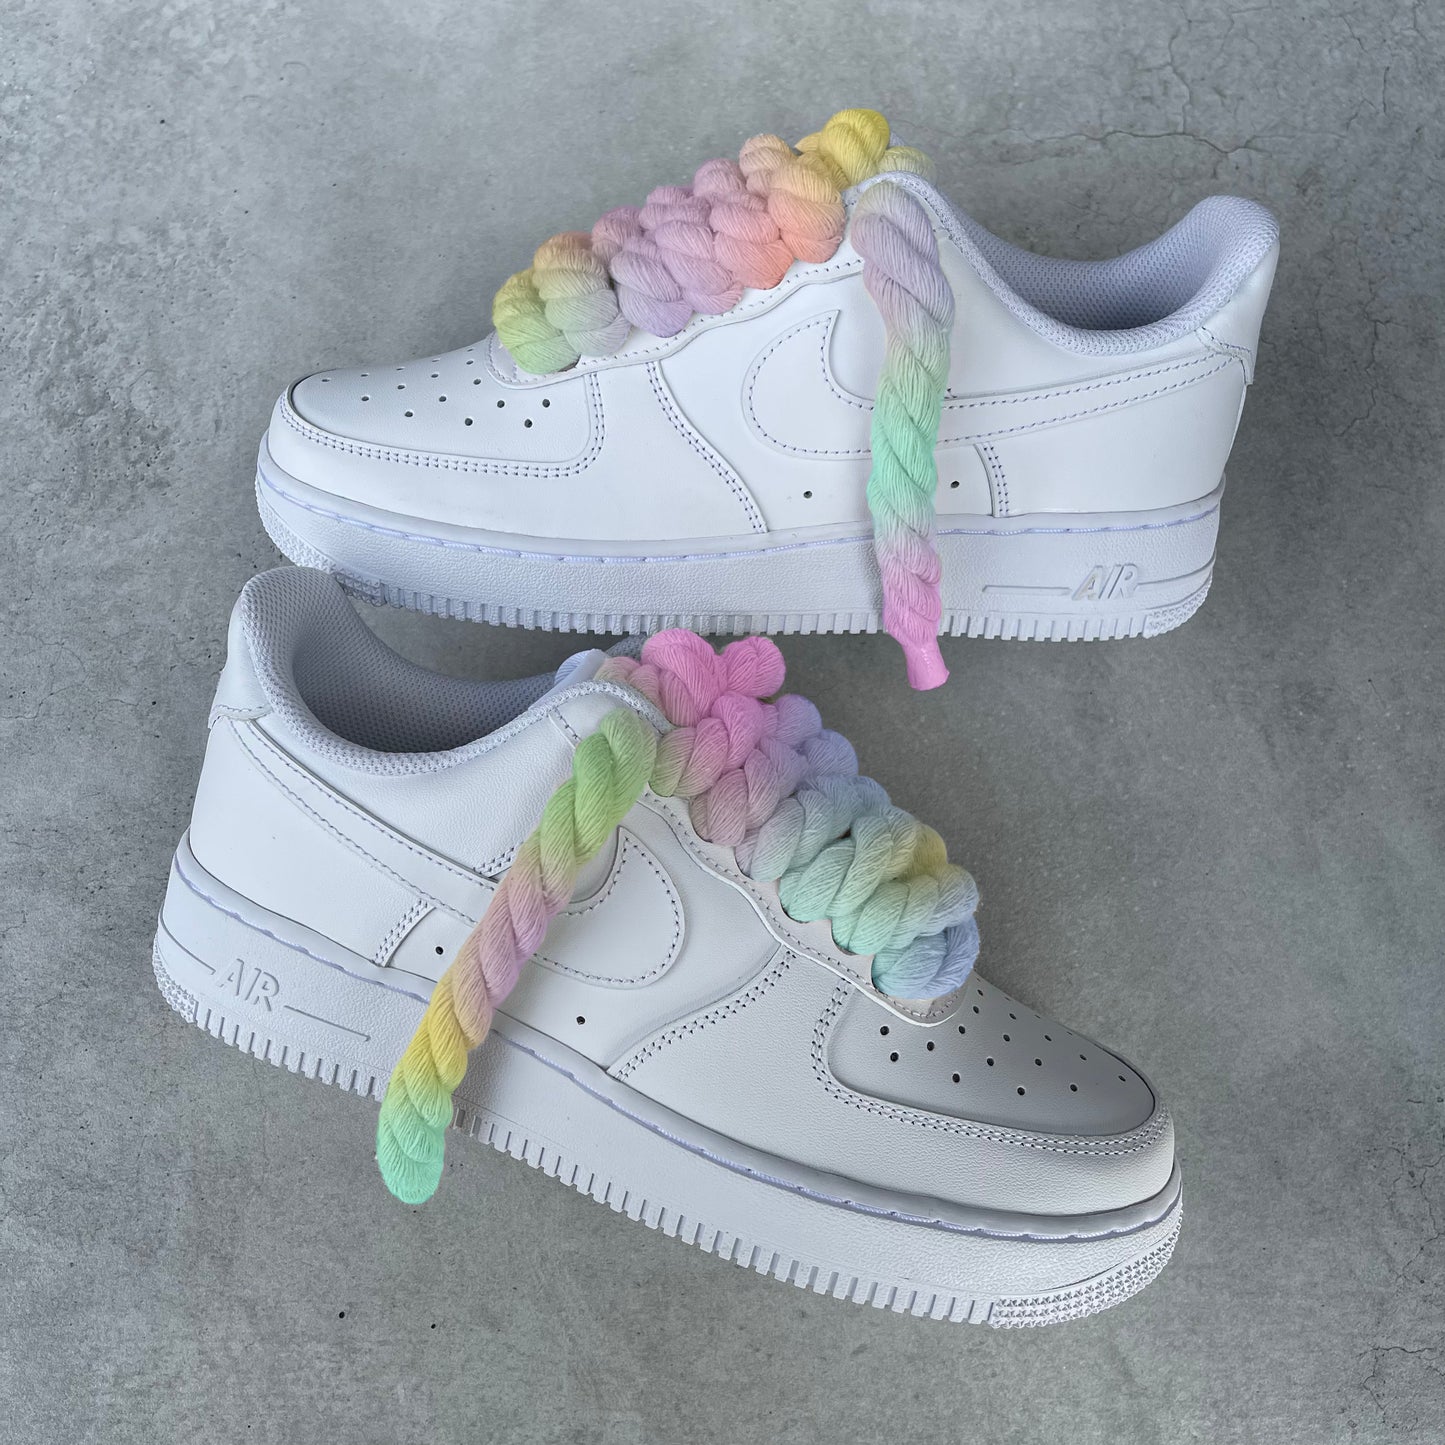 Custom AIR FORCE 1 - Rope laces (candy)